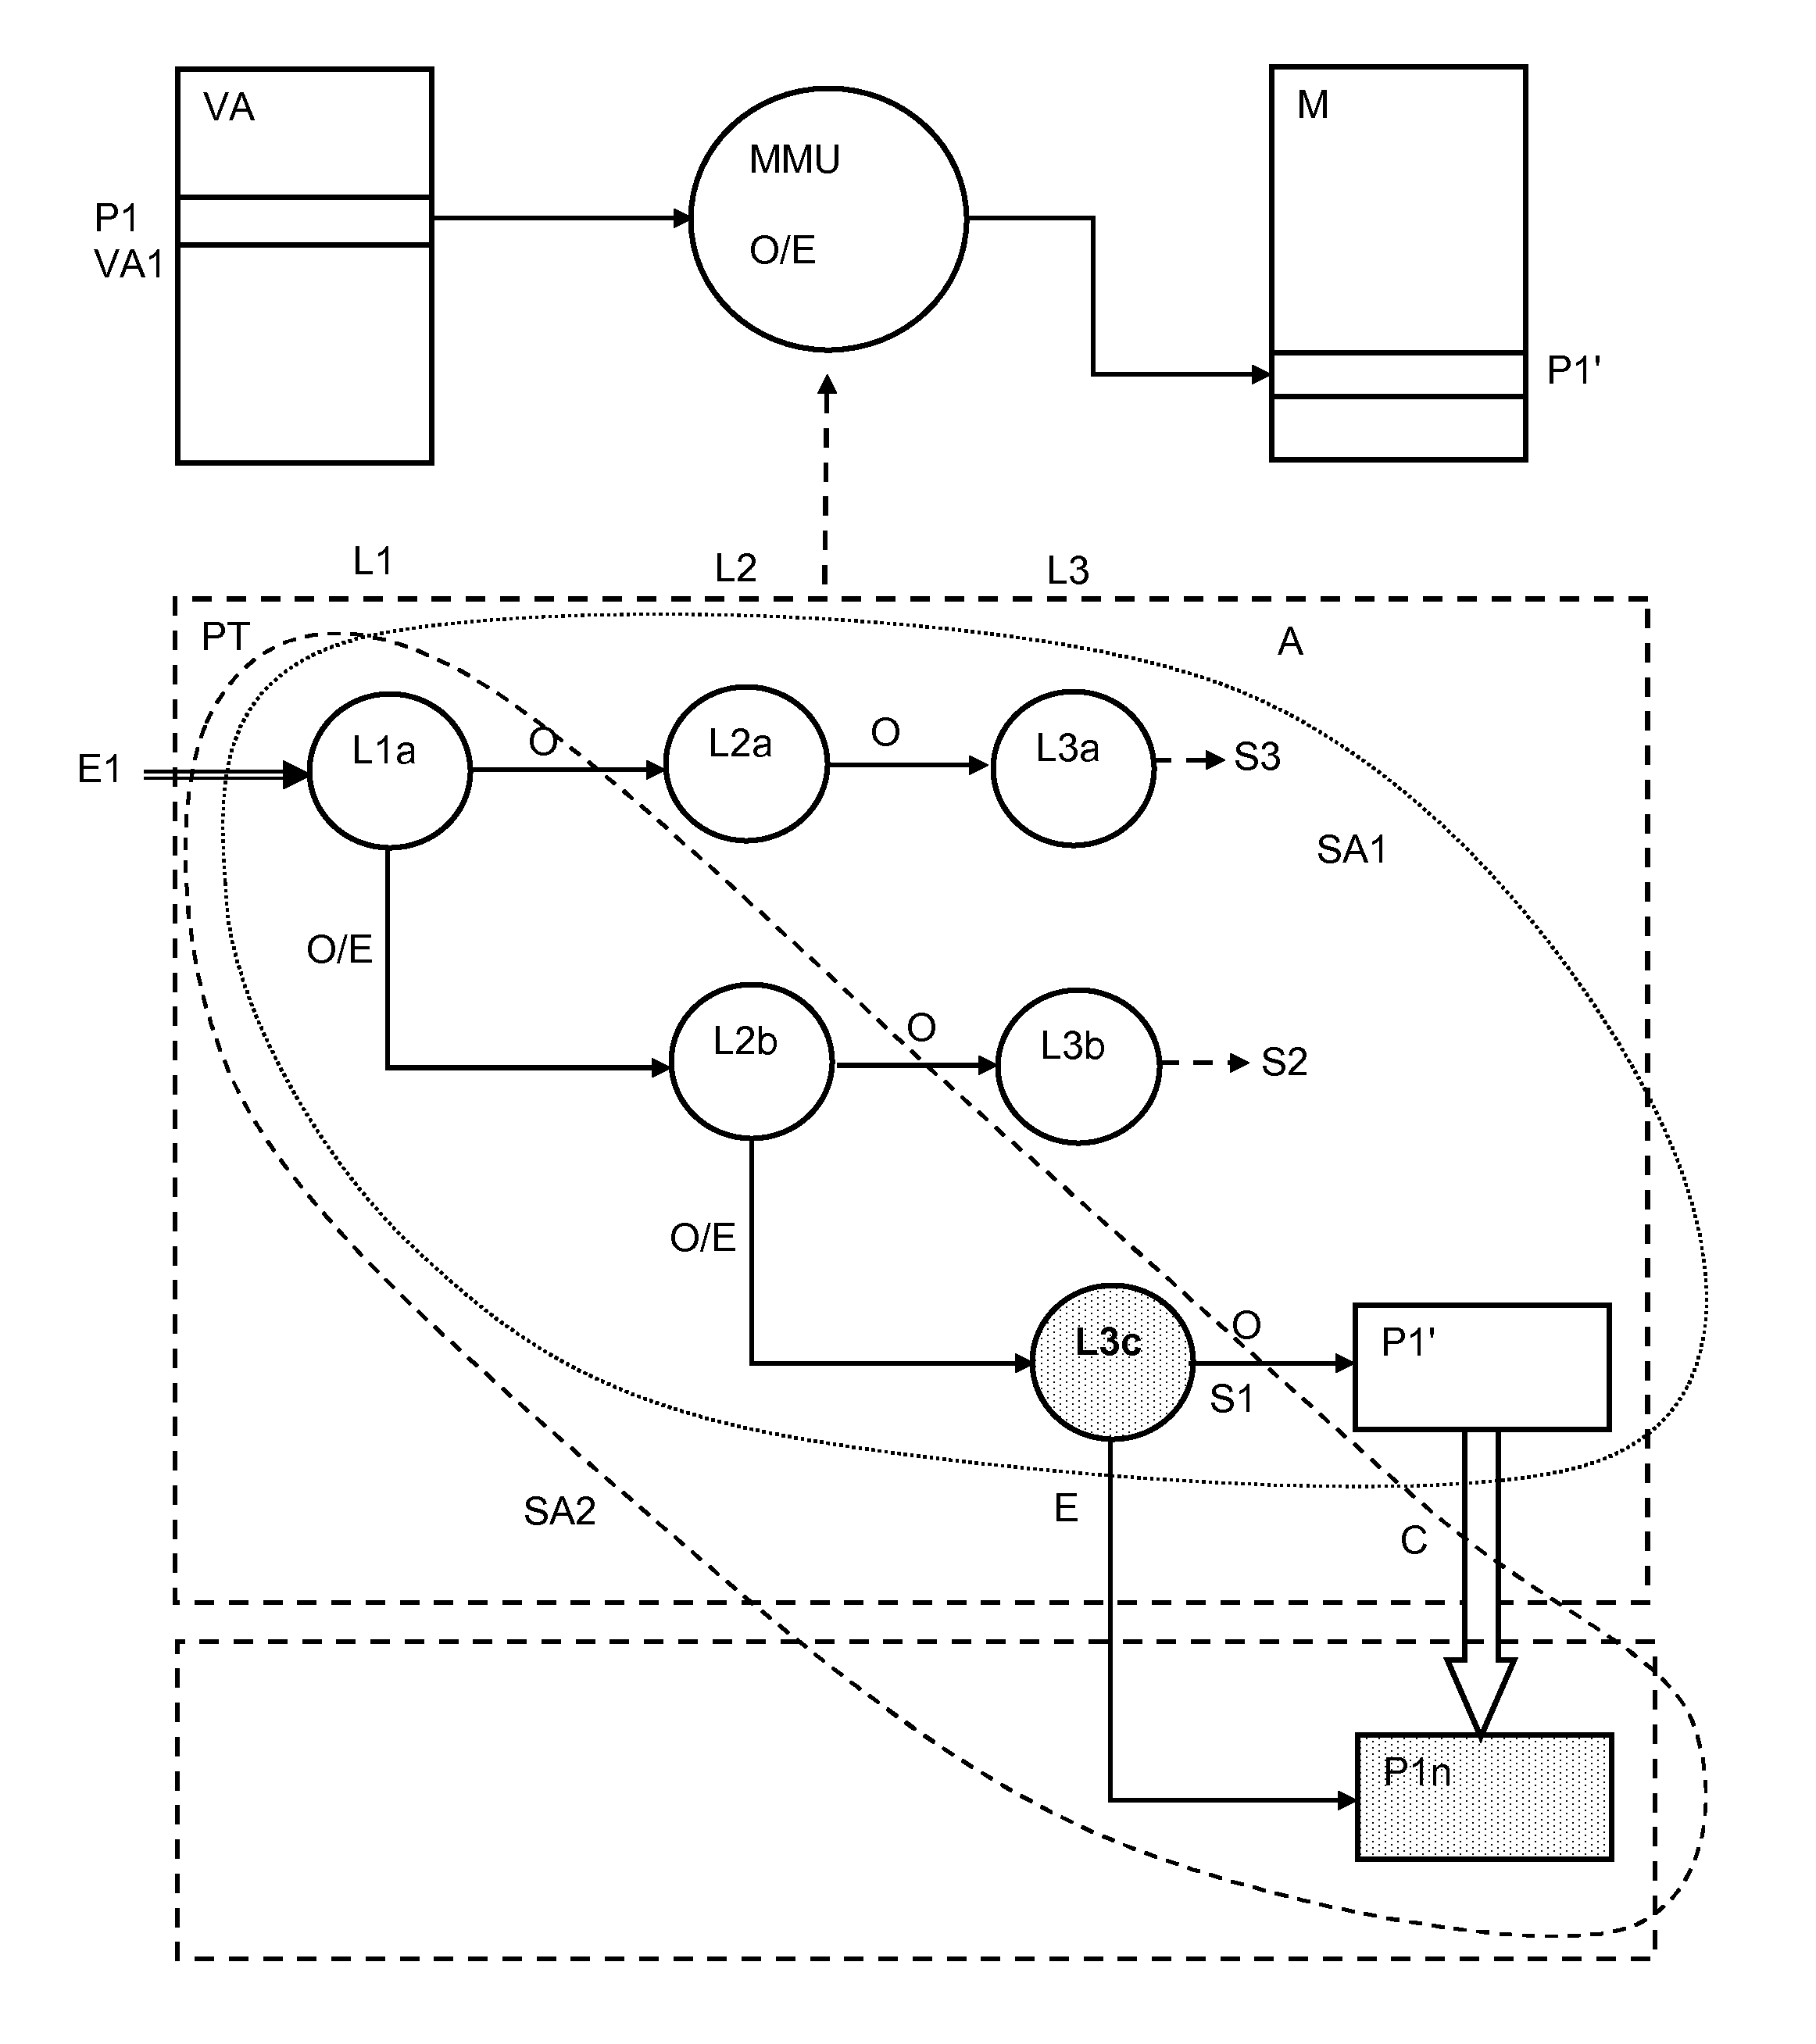 Method for updating data in memories using a memory management unit